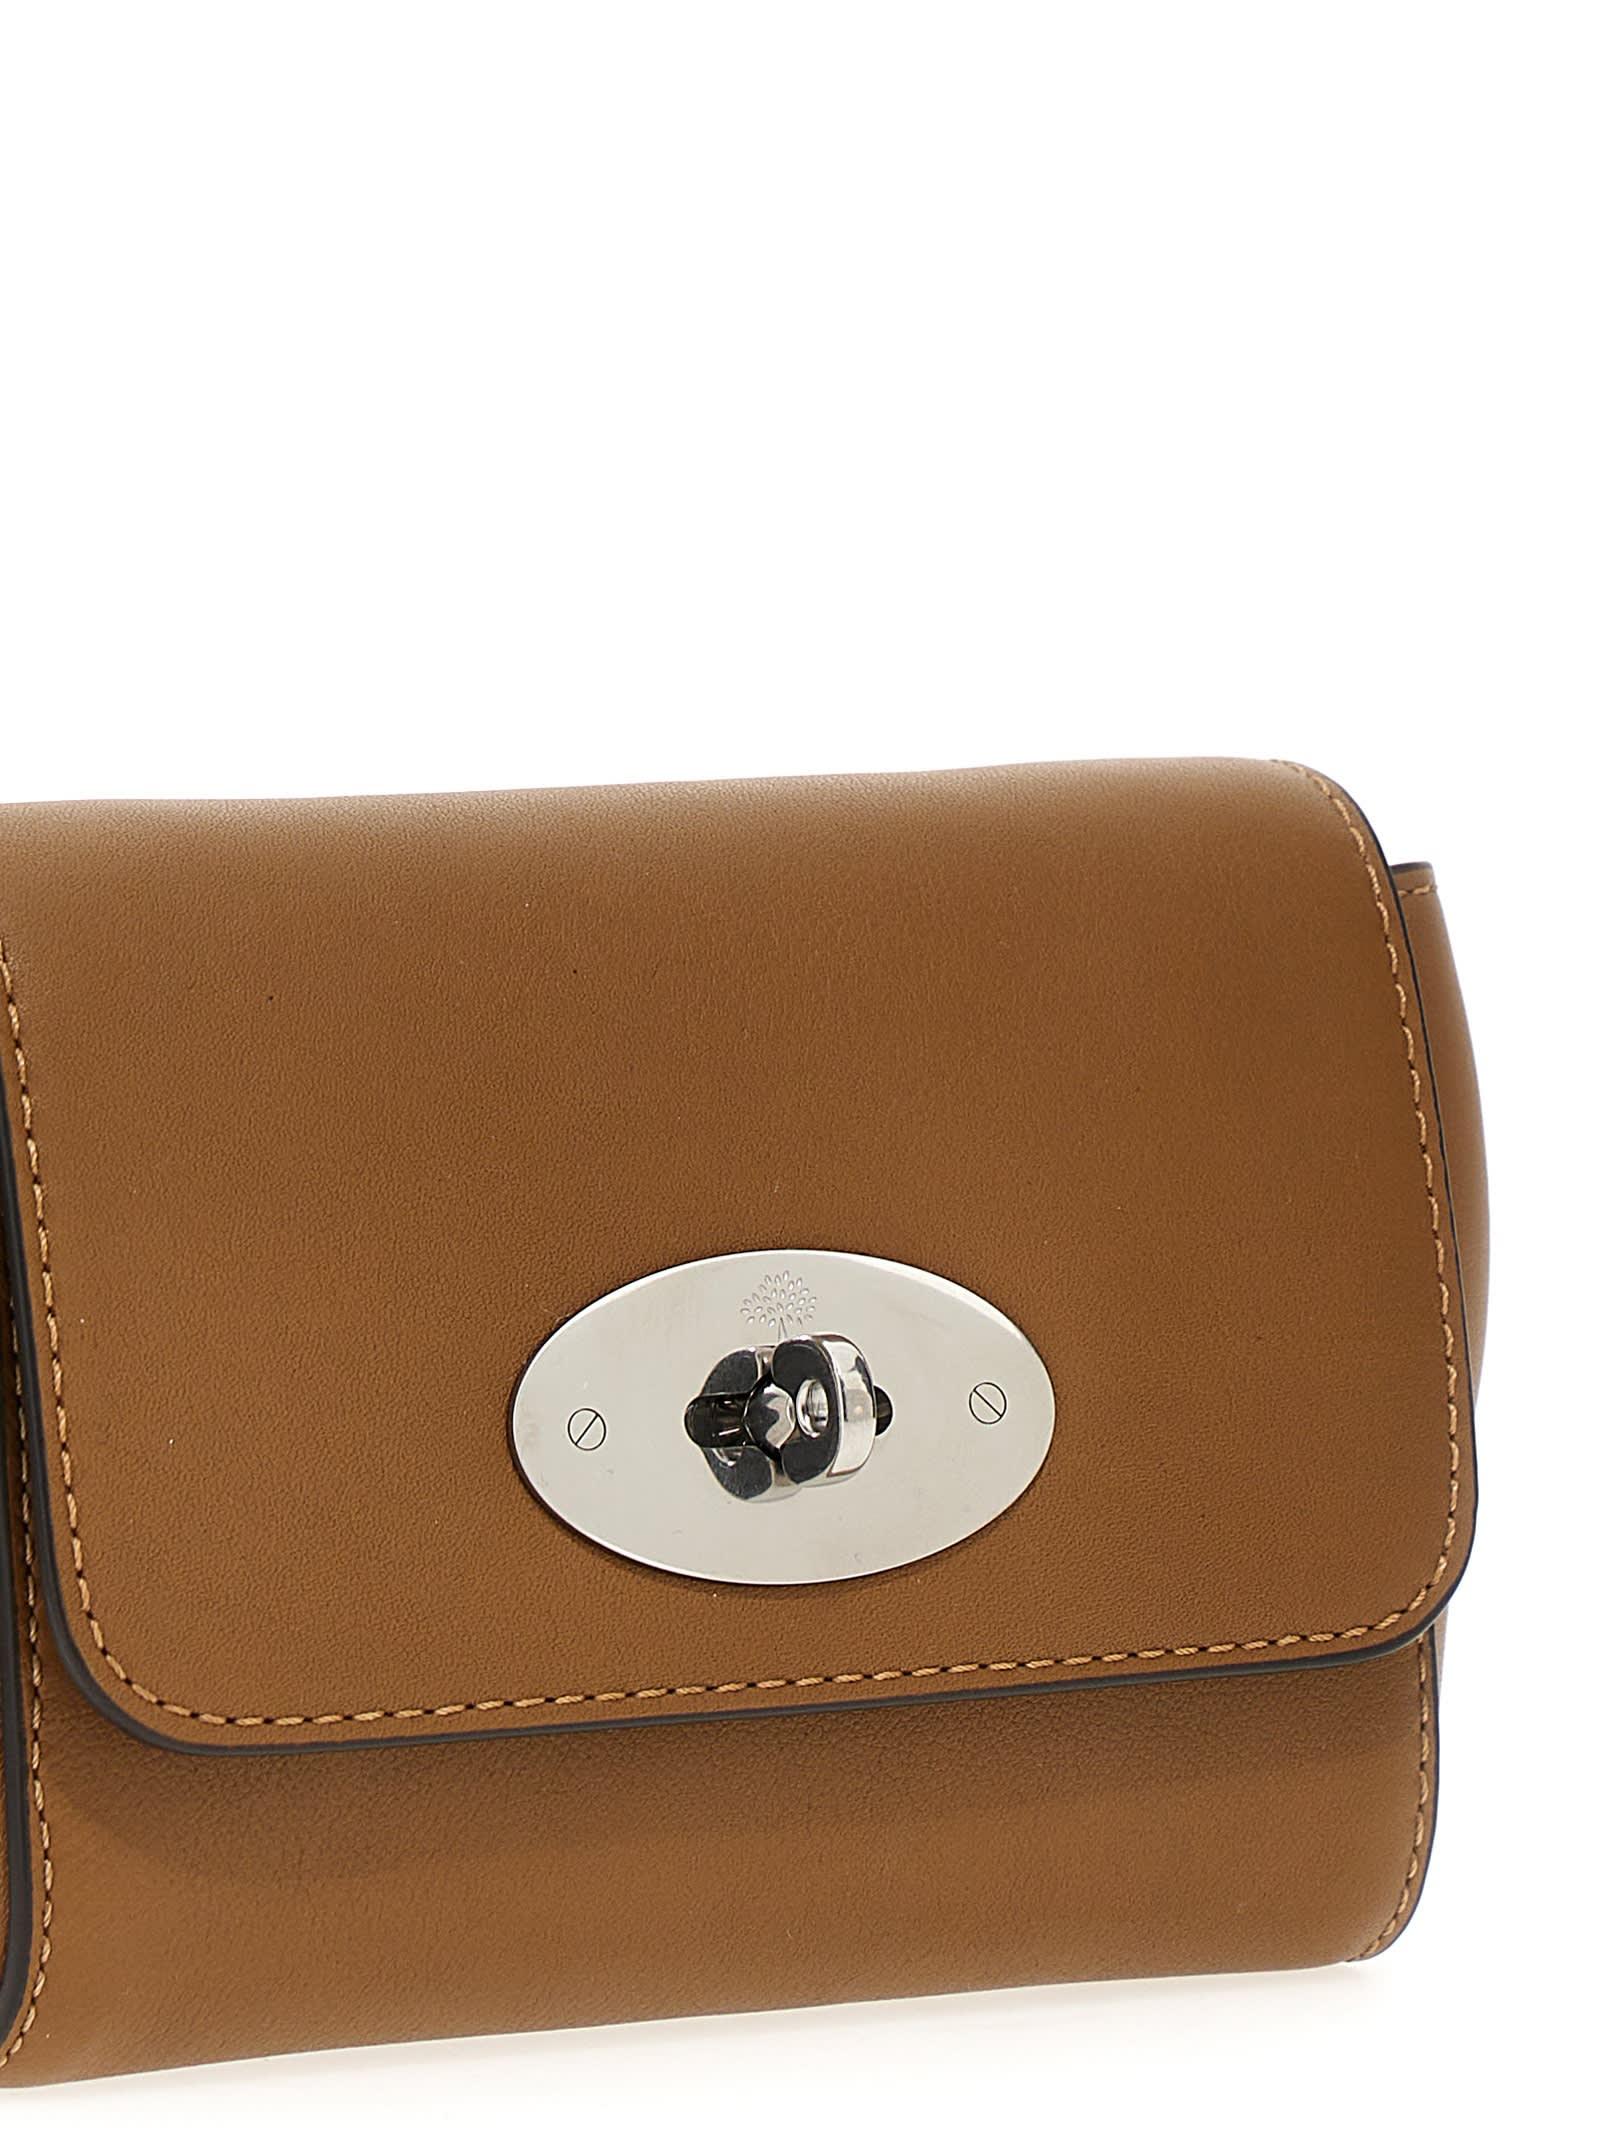 Mulberry Lily Crossbody Bag In Leather Woman in Brown